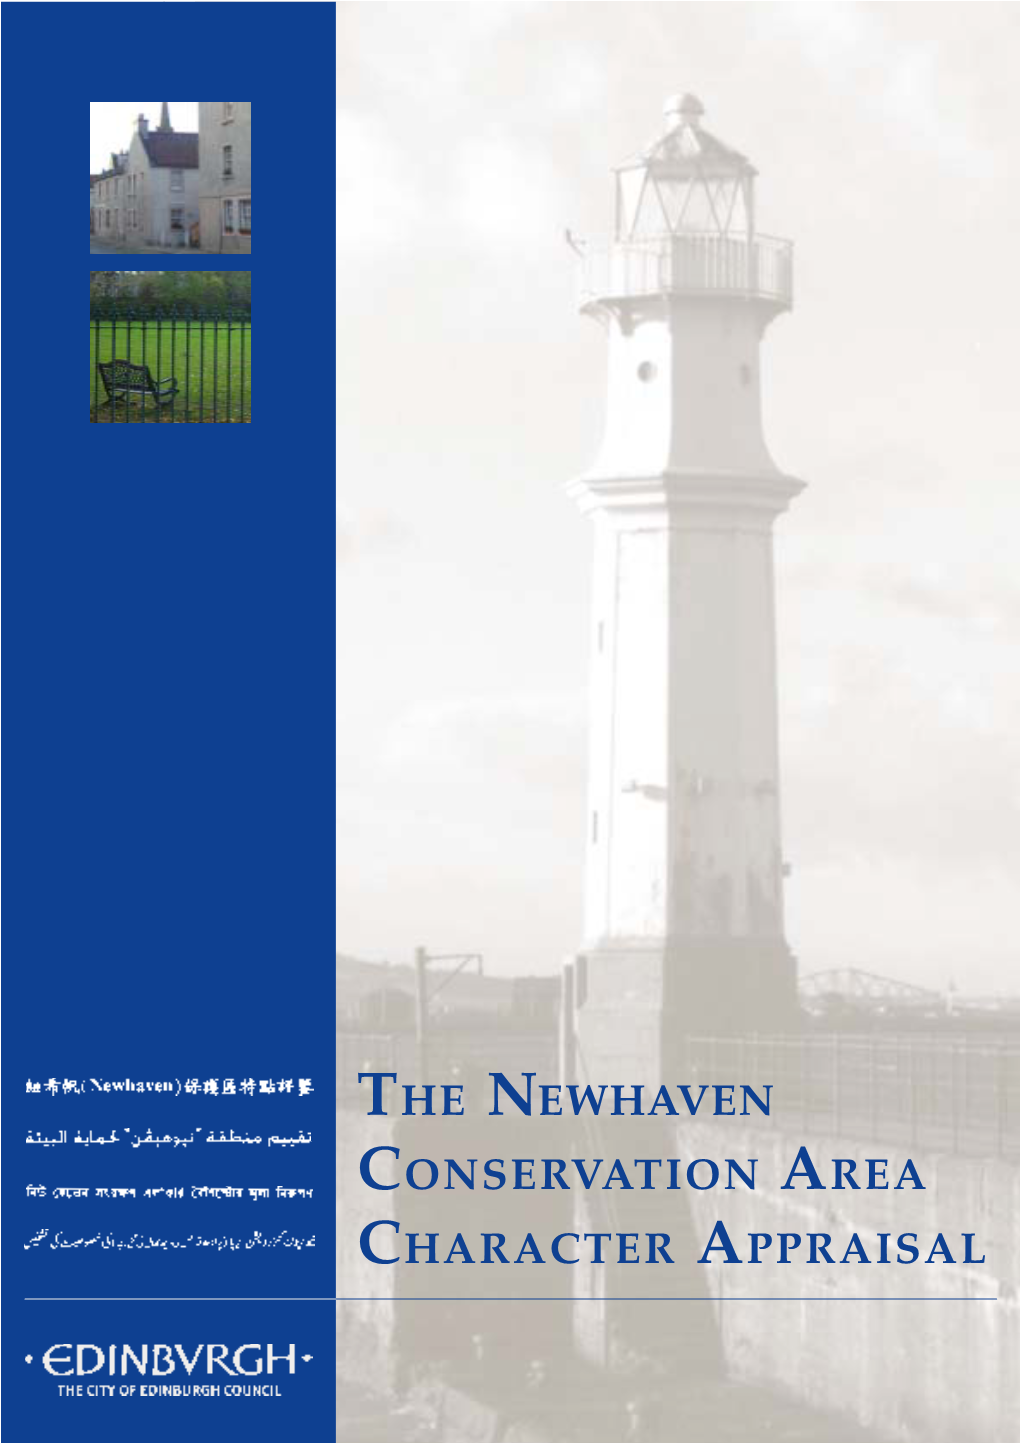 THE NEWHAVEN CONSERVATION AREA CHARACTER APPRAISAL the NEWHAVEN CONSERVATION AREA CHARACTER APPRAISAL WAS APPROVED by the PLANNING COMMITTEE on 11Th MAY 2000